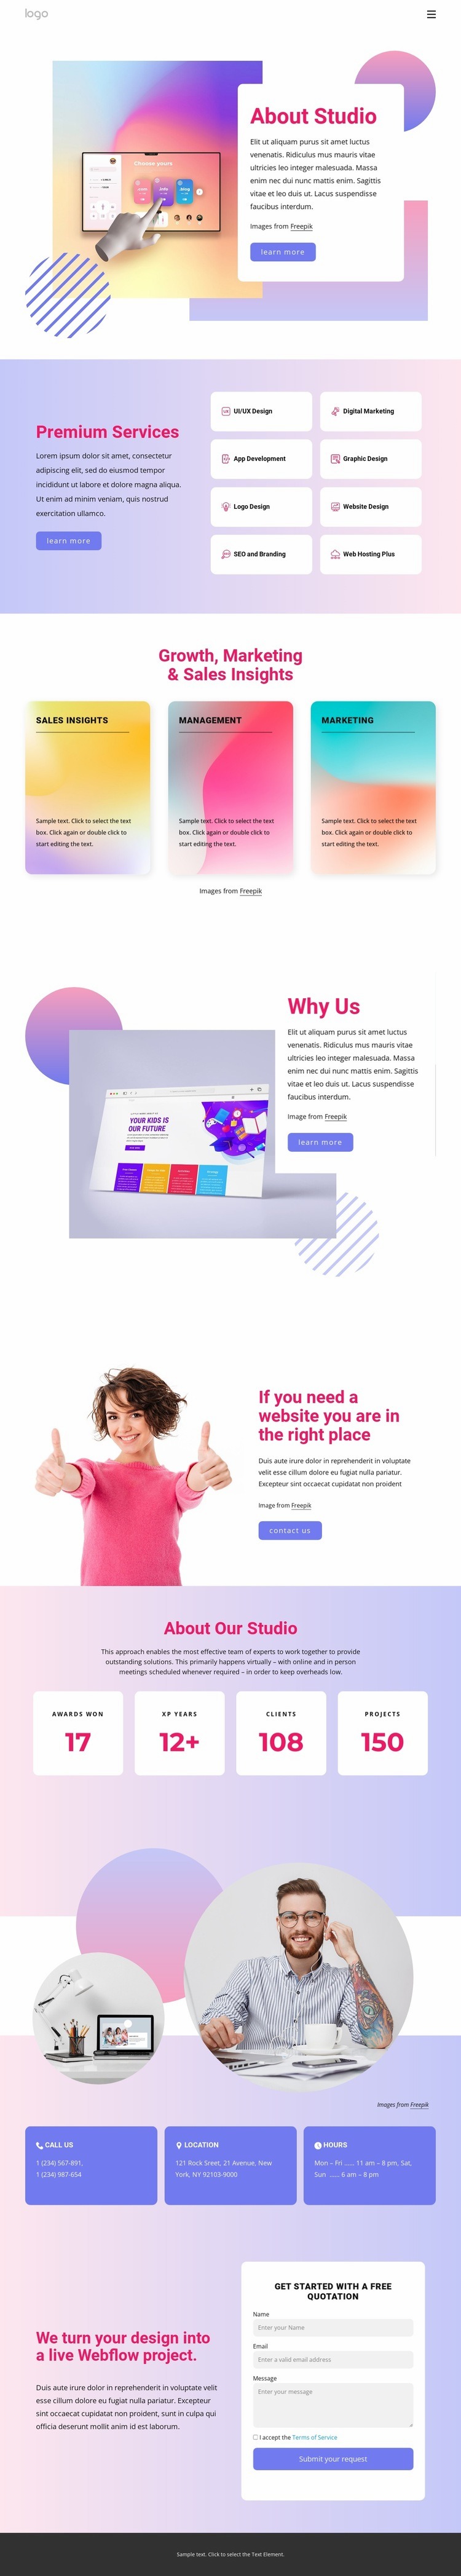 Growth, marketing and sales Web Page Design